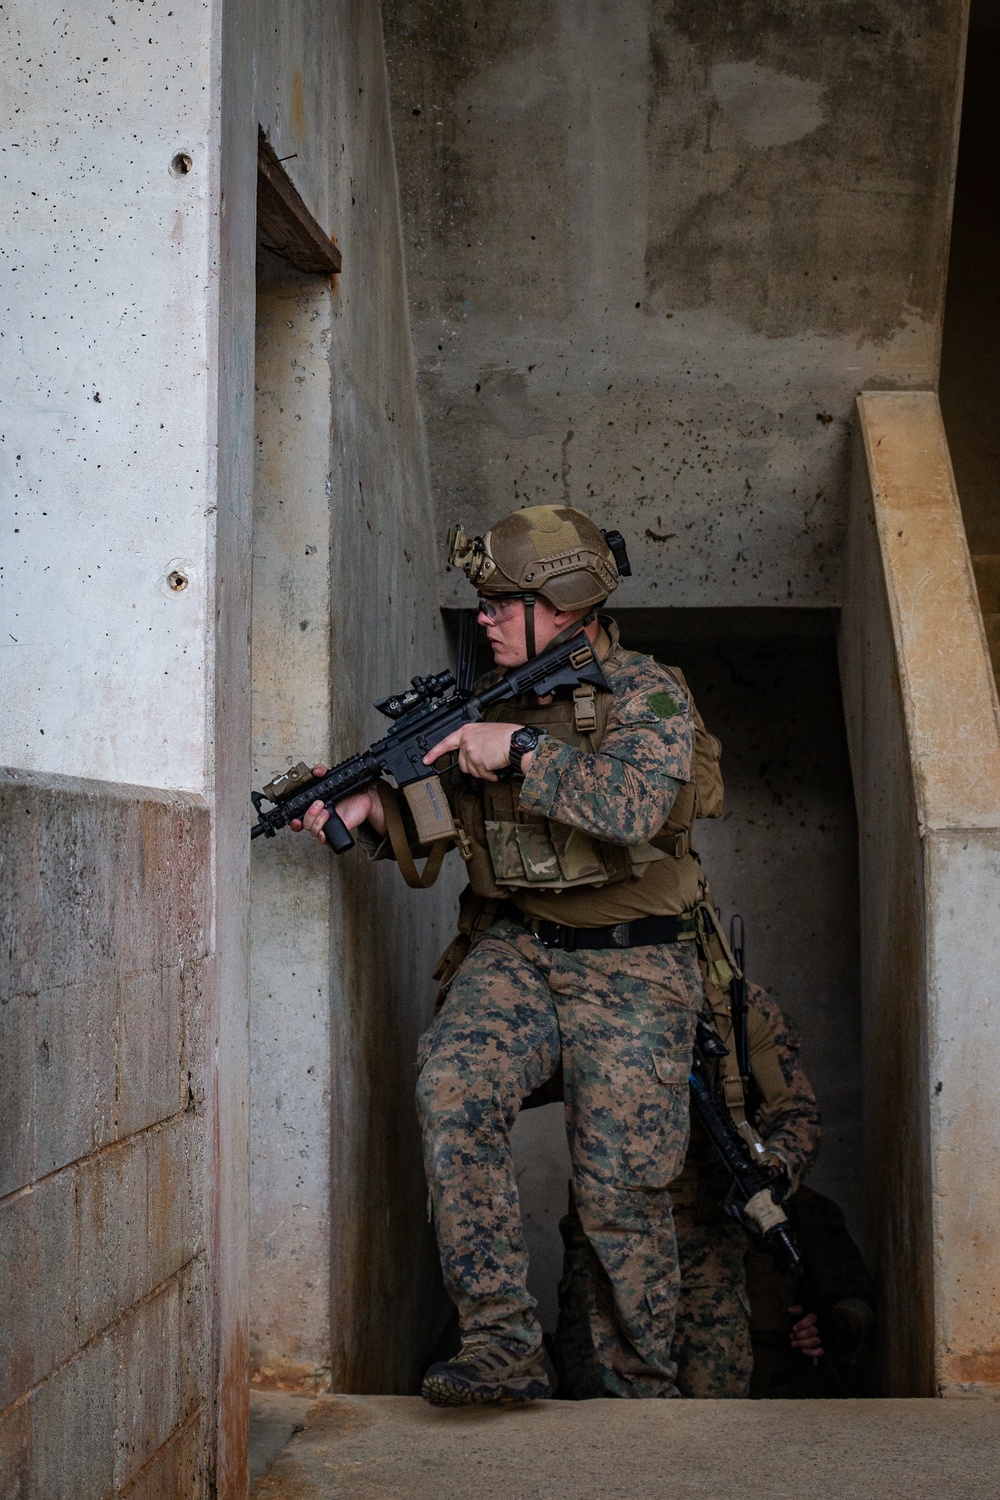 Marines with MRF and NSW enhance CQC abilities